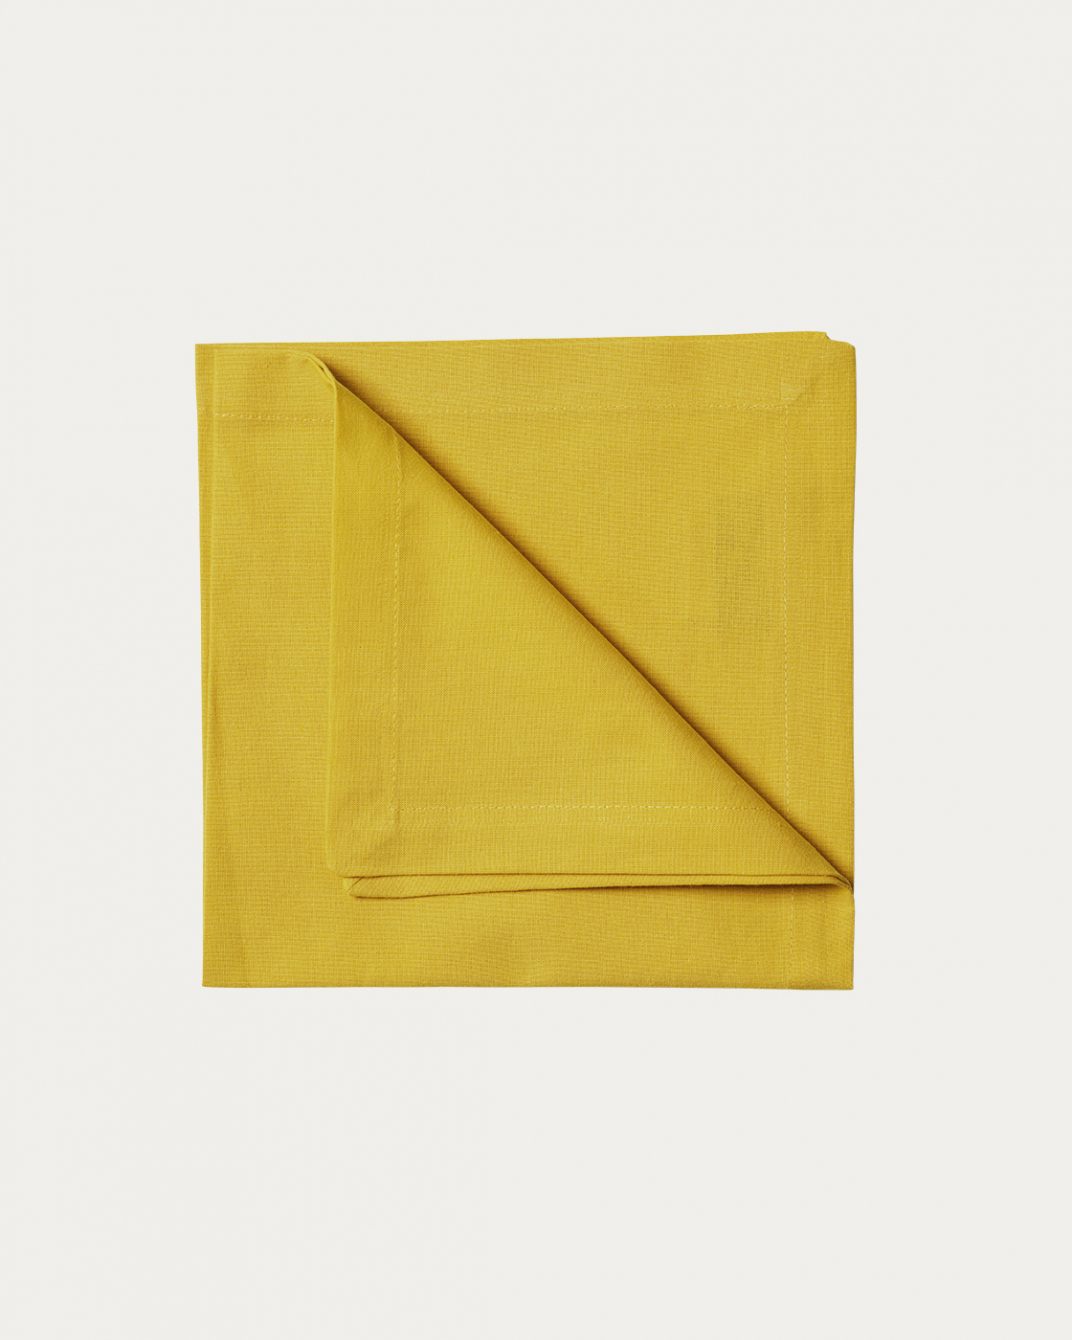 Product image mustard yellow ROBERT napkin made of soft cotton from LINUM DESIGN. Size 45x45 cm and sold in 4-pack.